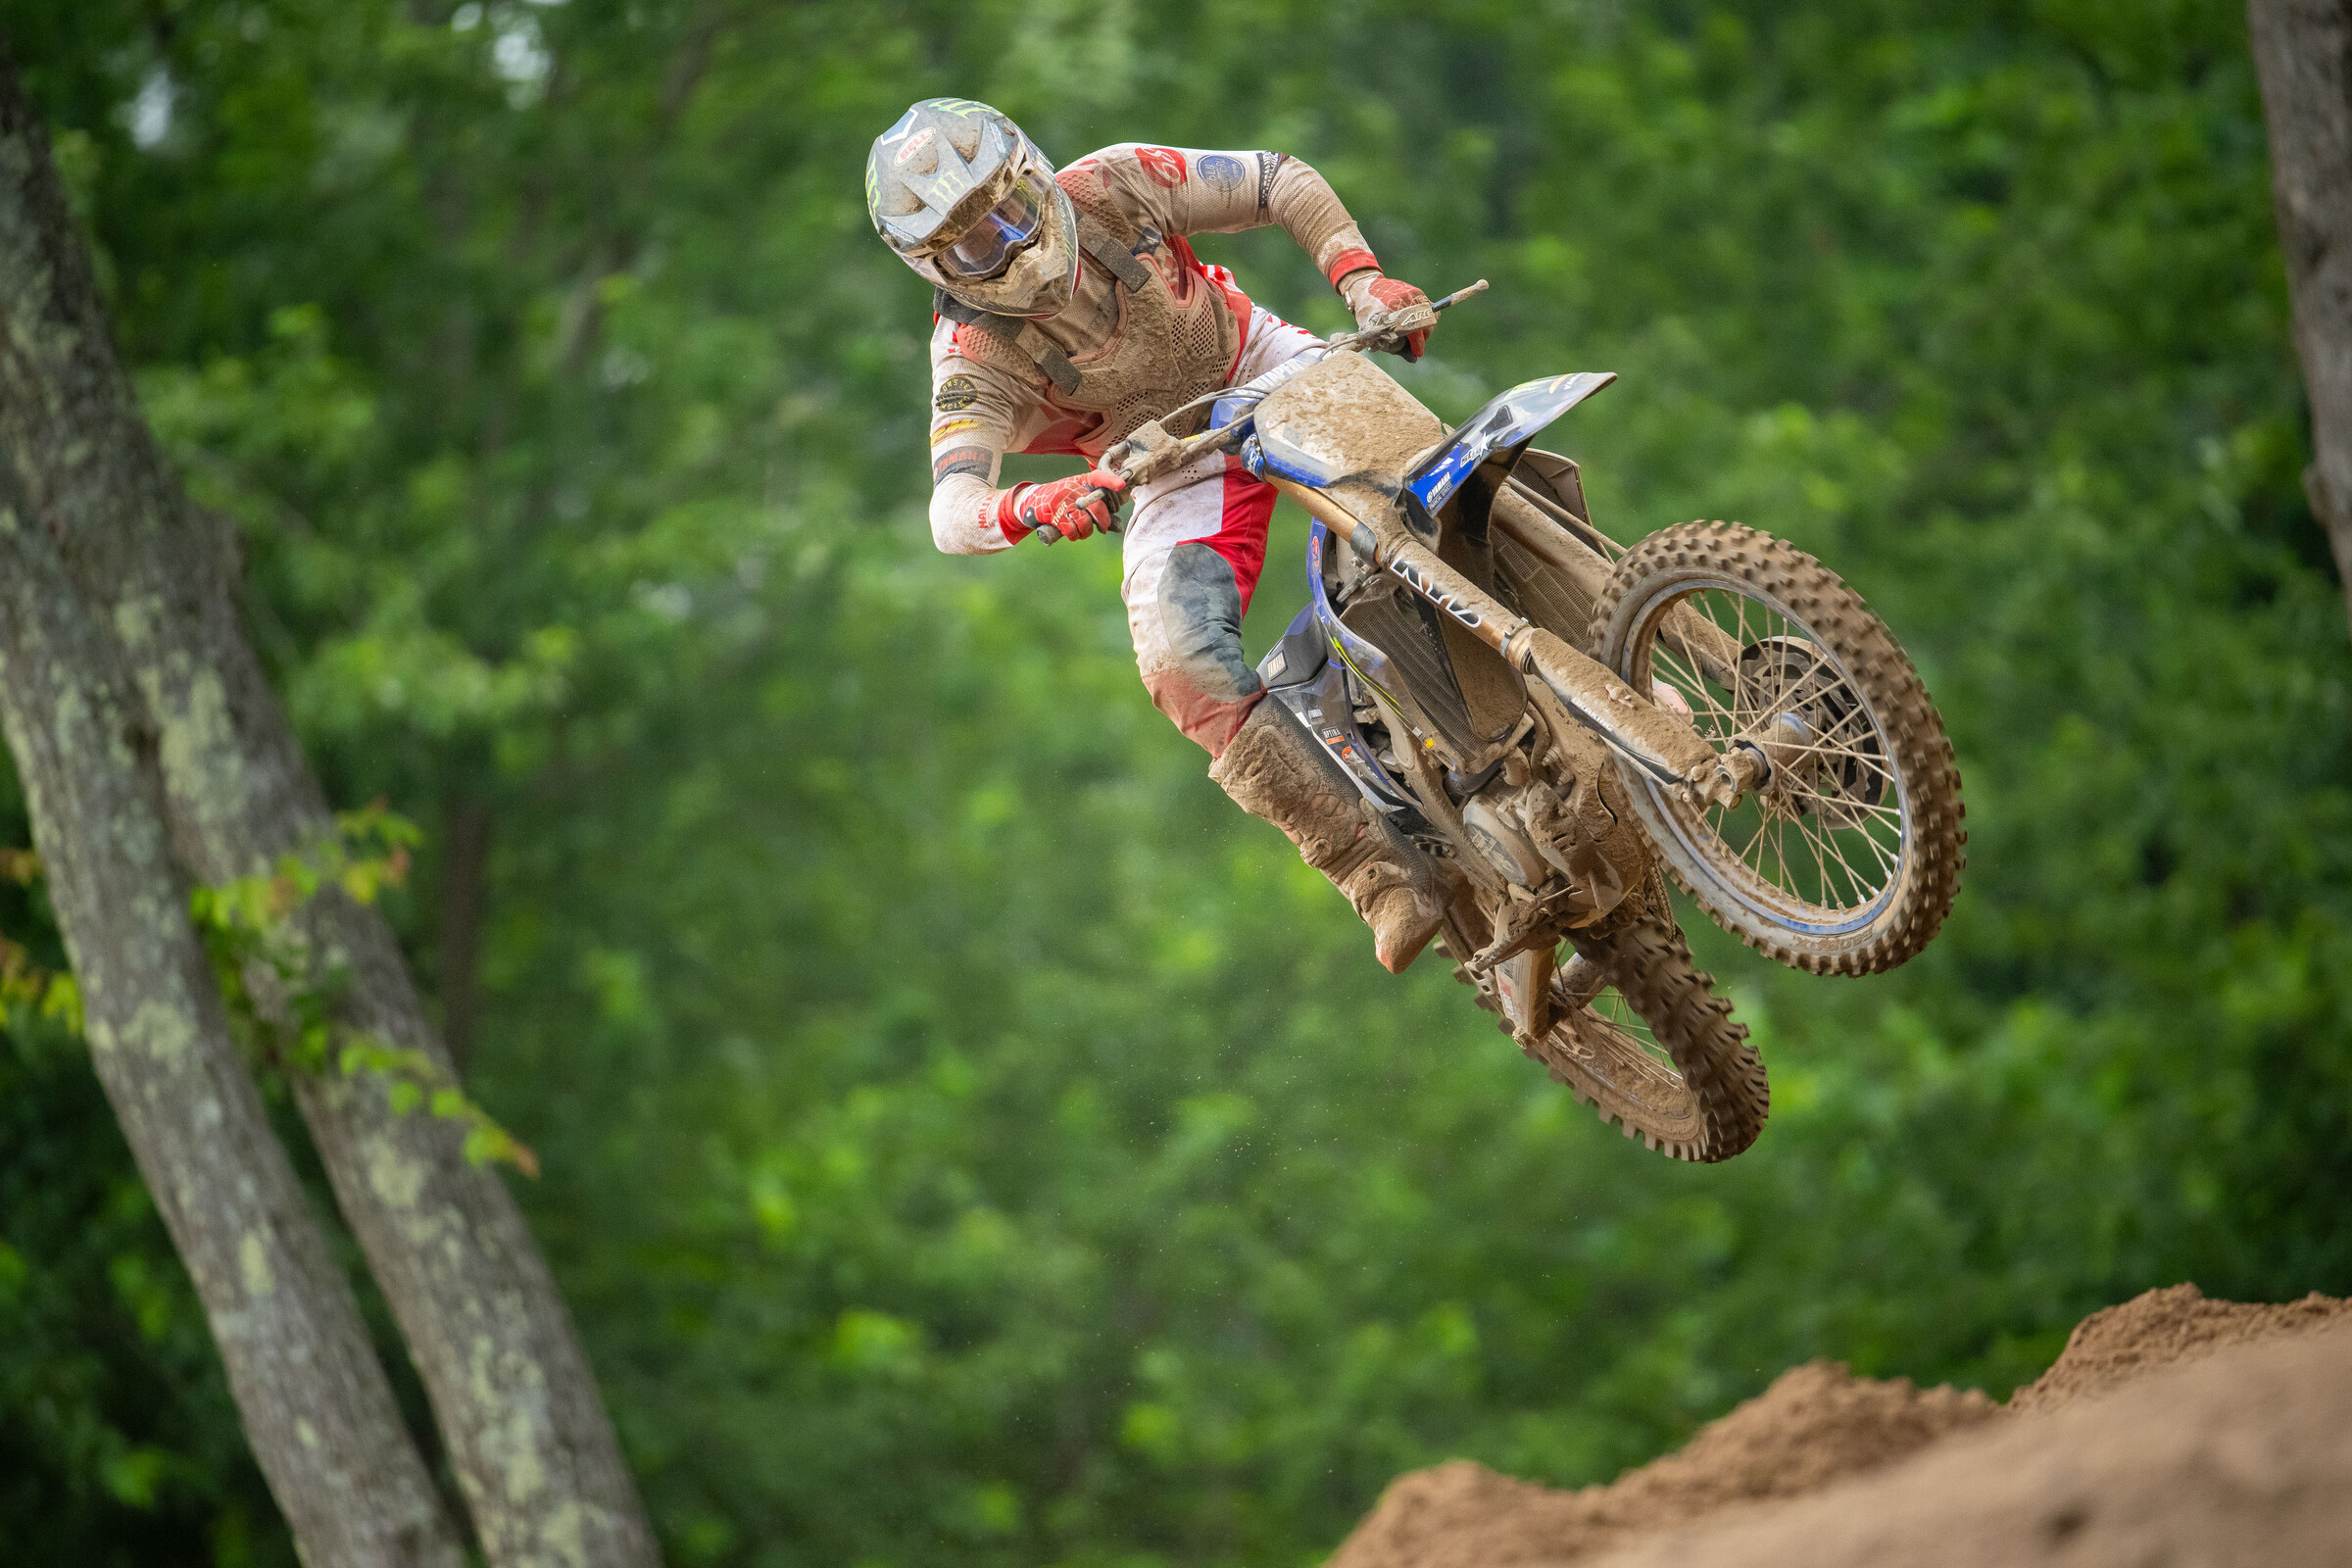 How to Watch/Stream 2023 Spring Creek National and MXGP of Czech Republic on TV